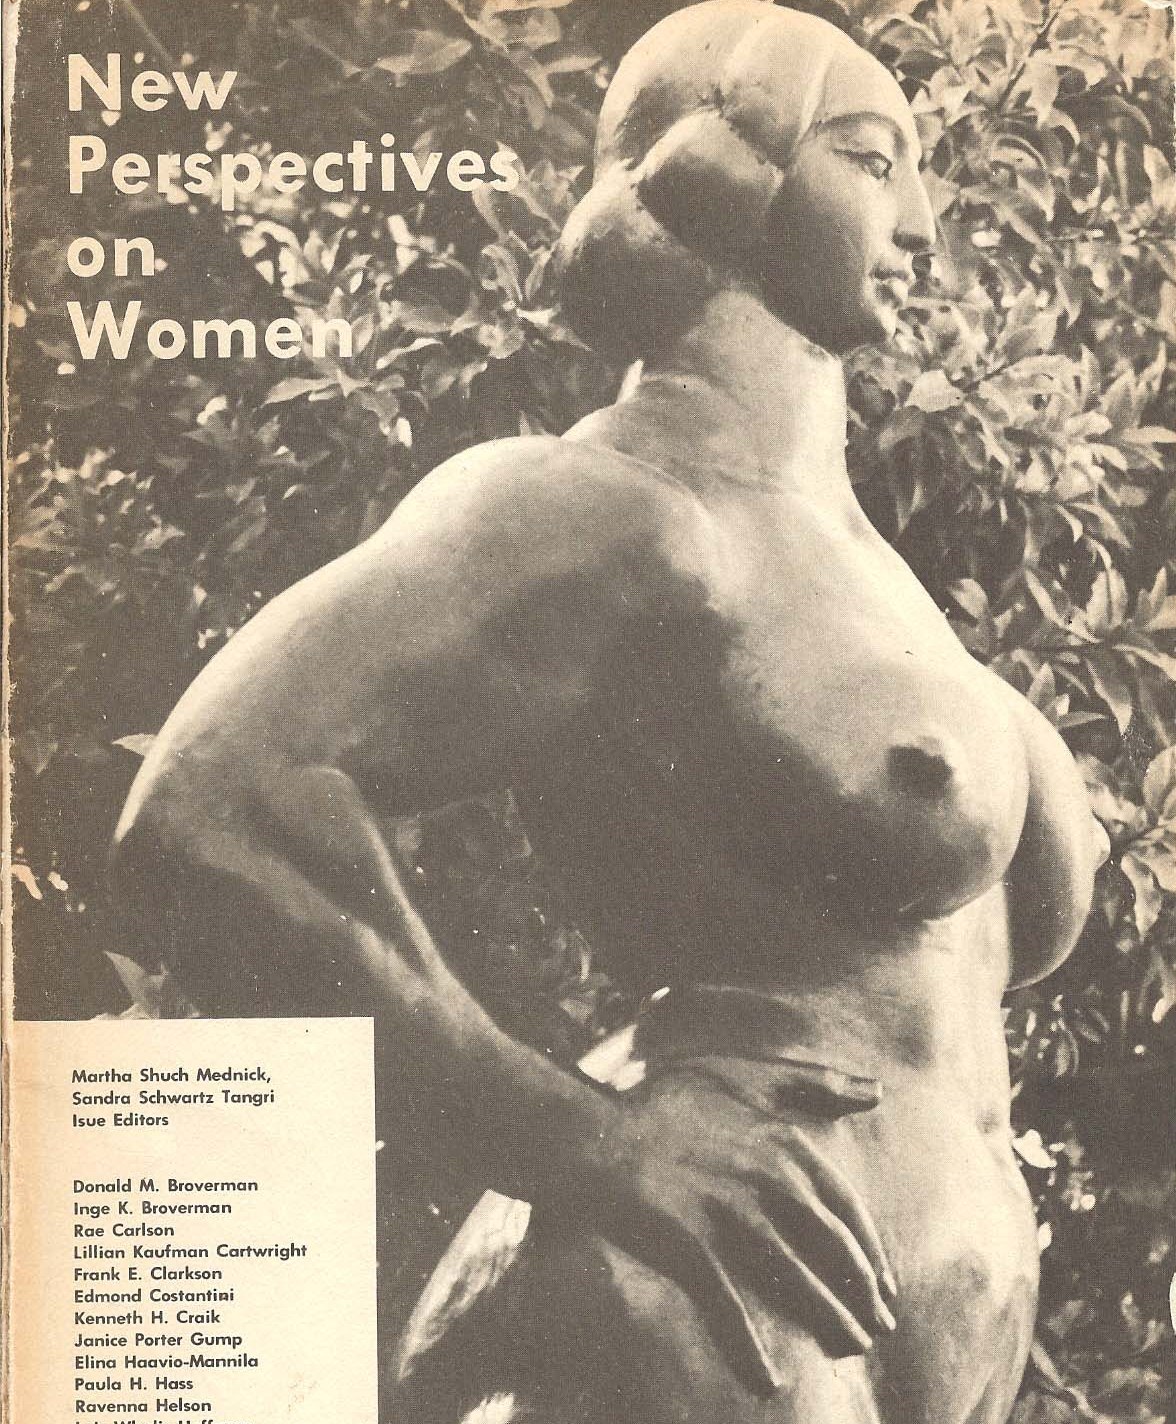 The cover of the 1972 issue of the Journal of Social Issues "New Perspectives on Women", co-edited by Martha Mednick.